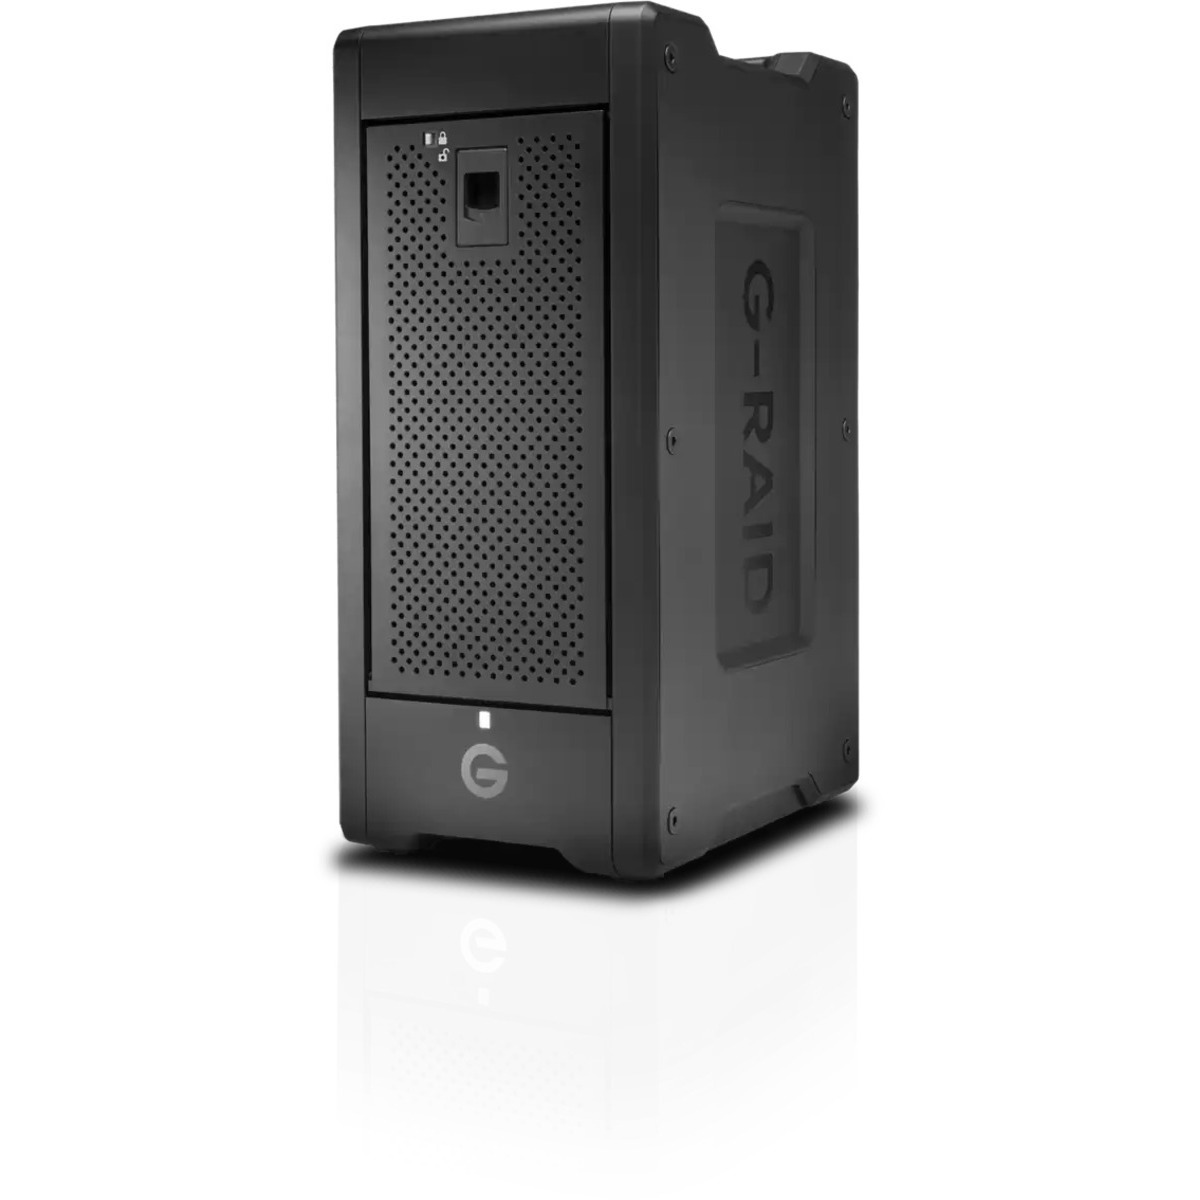 G-Technology G-RAID 8 TB3 DAS - Direct Attached Storage Device Burn-In Tested Configurations